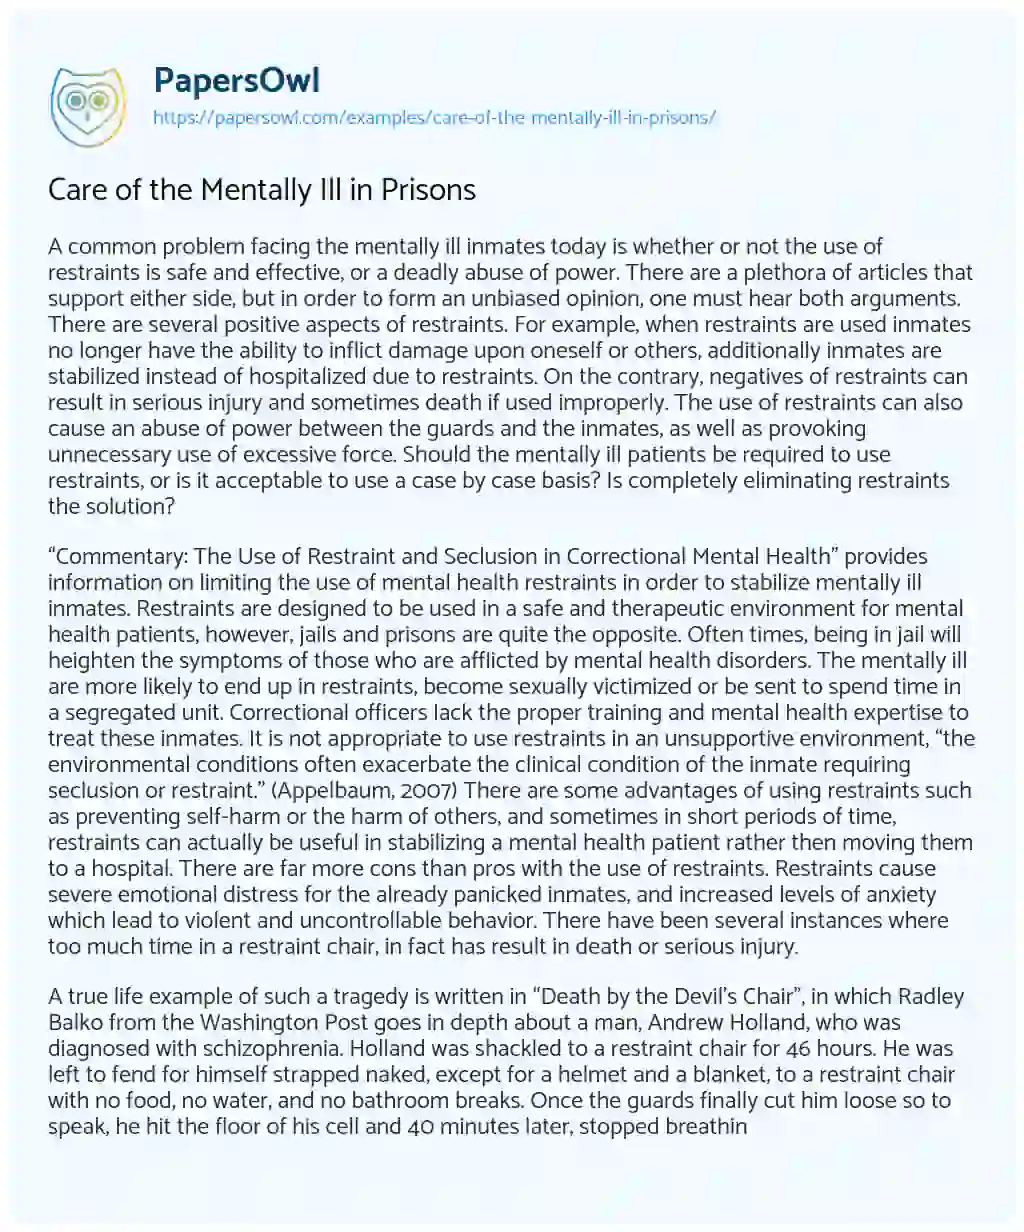 Essay on Care of the Mentally Ill in Prisons